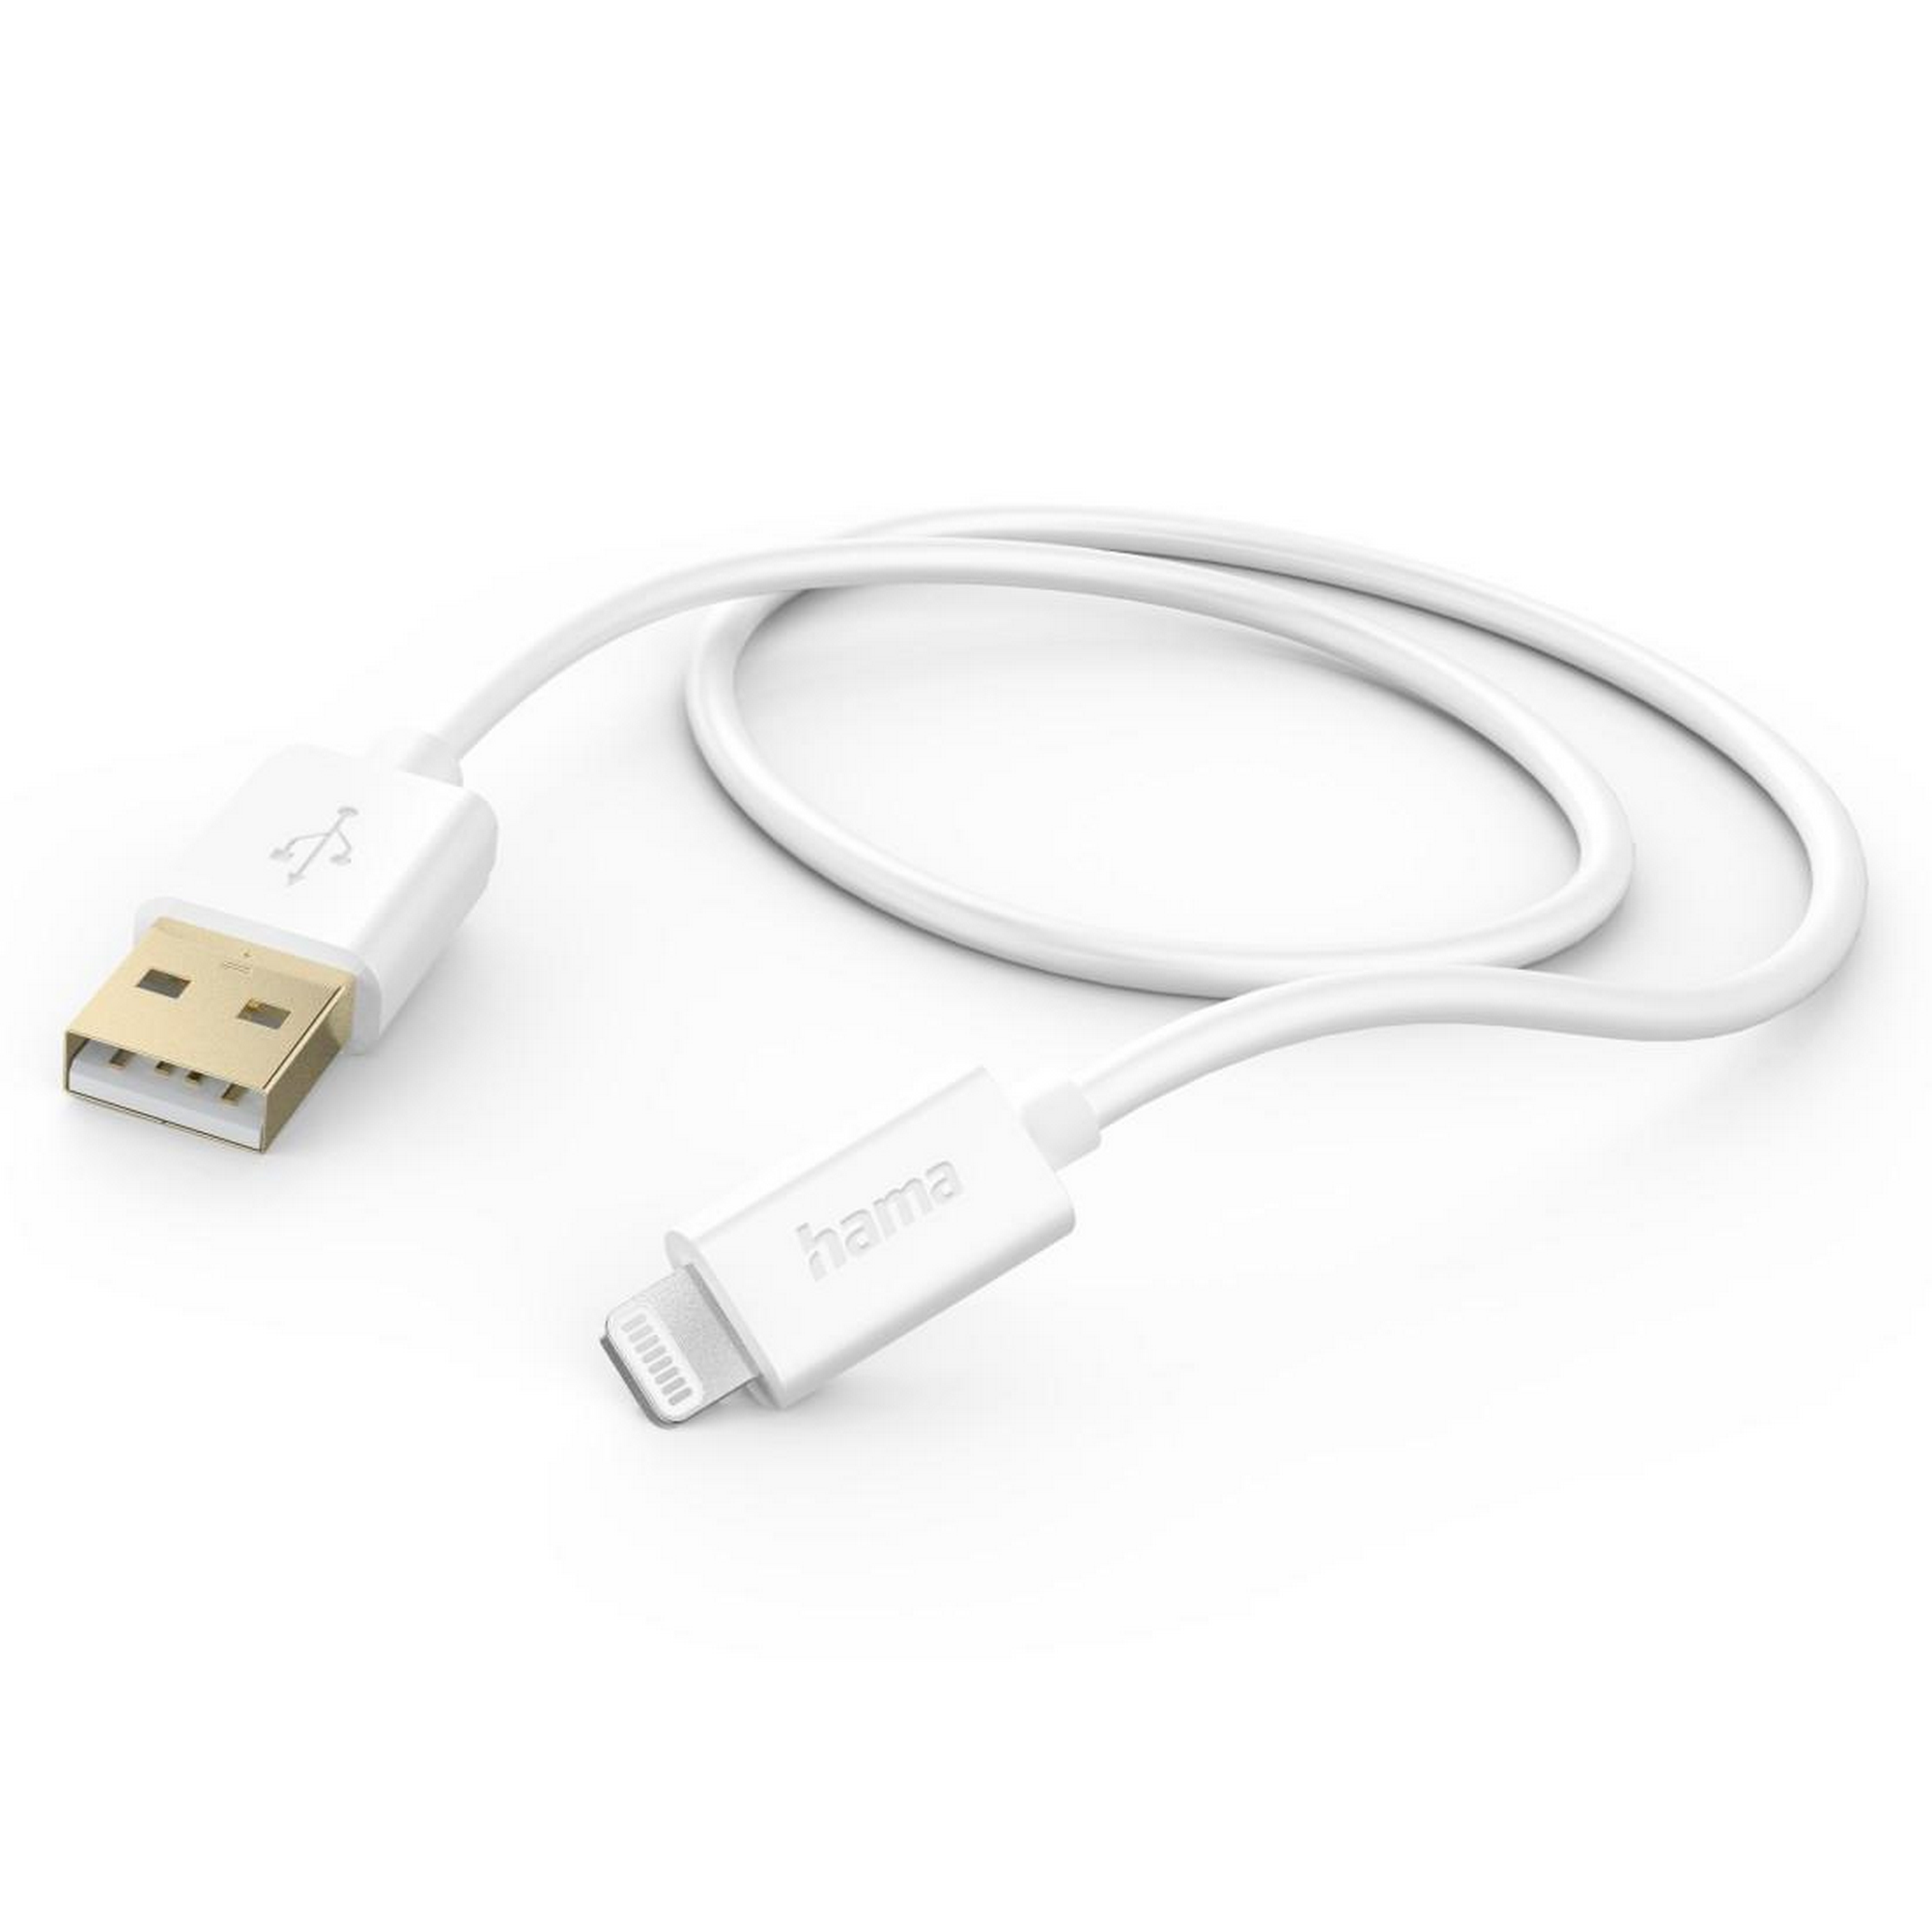 Ladekabel weiß USB-A mit Lightning 1,5 m + product picture